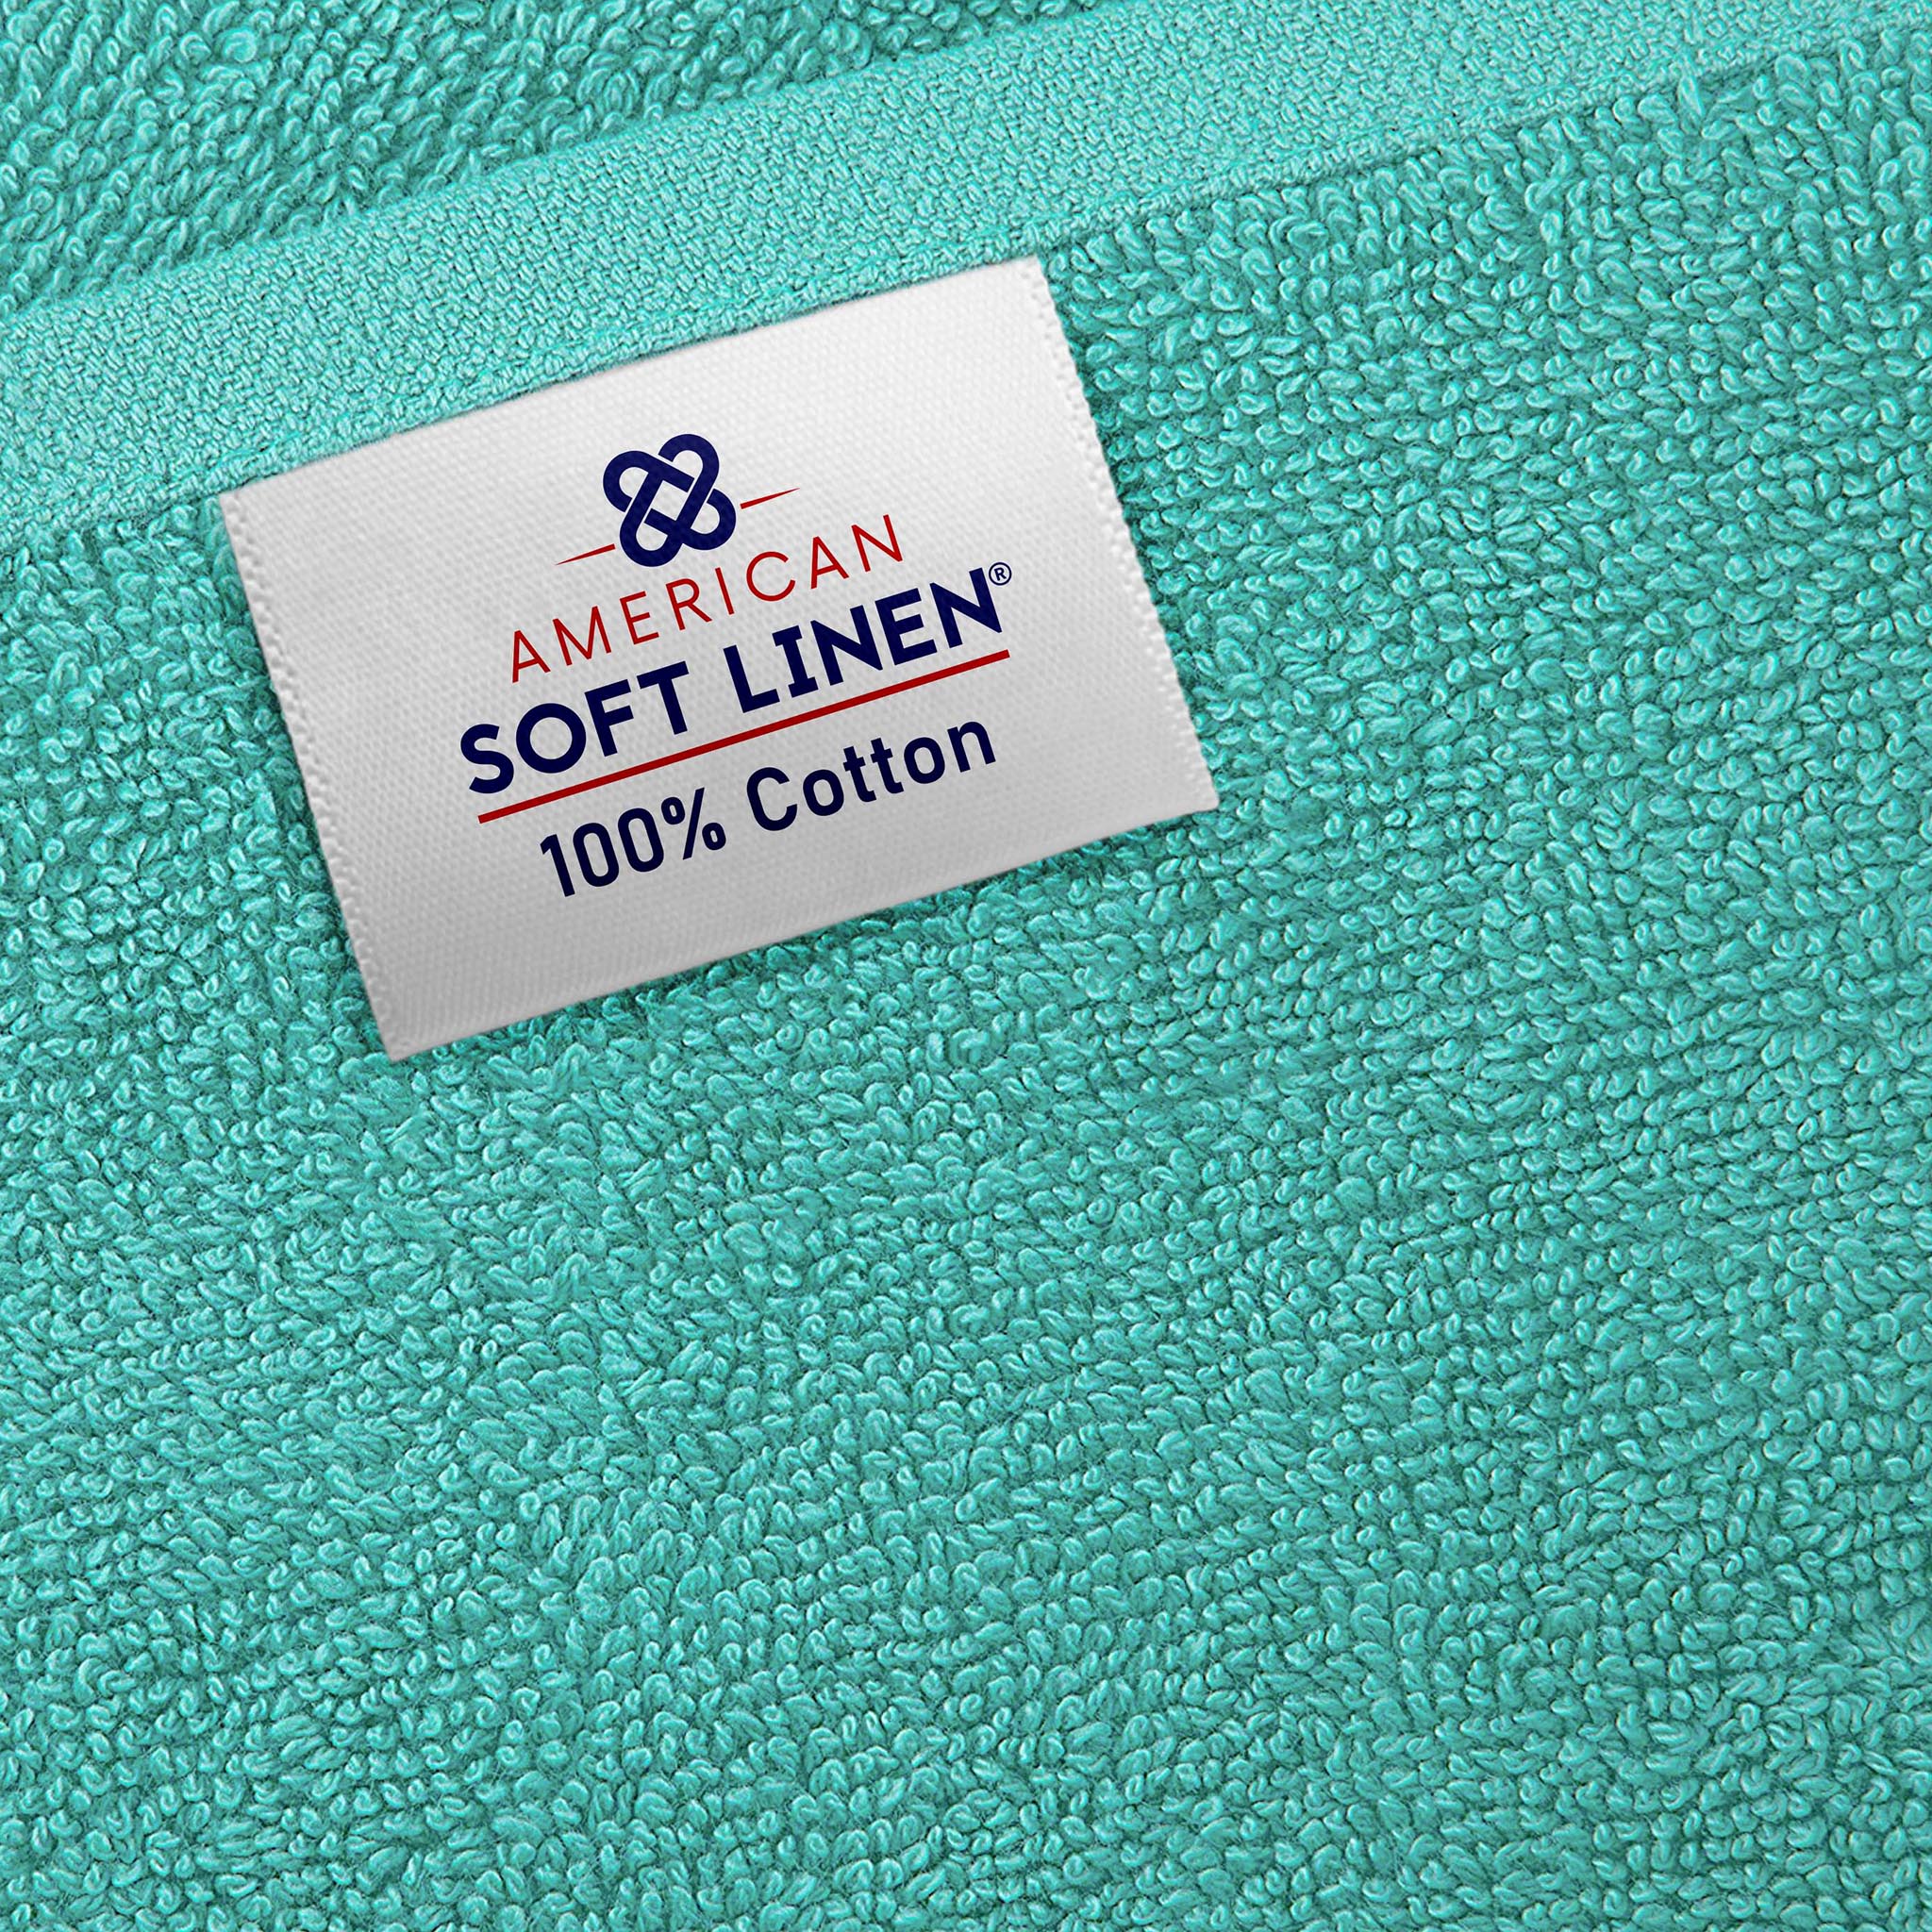 American Soft Linen 100% Ring Spun Cotton 40x80 Inches Oversized Bath Sheets turquoise-blue-6